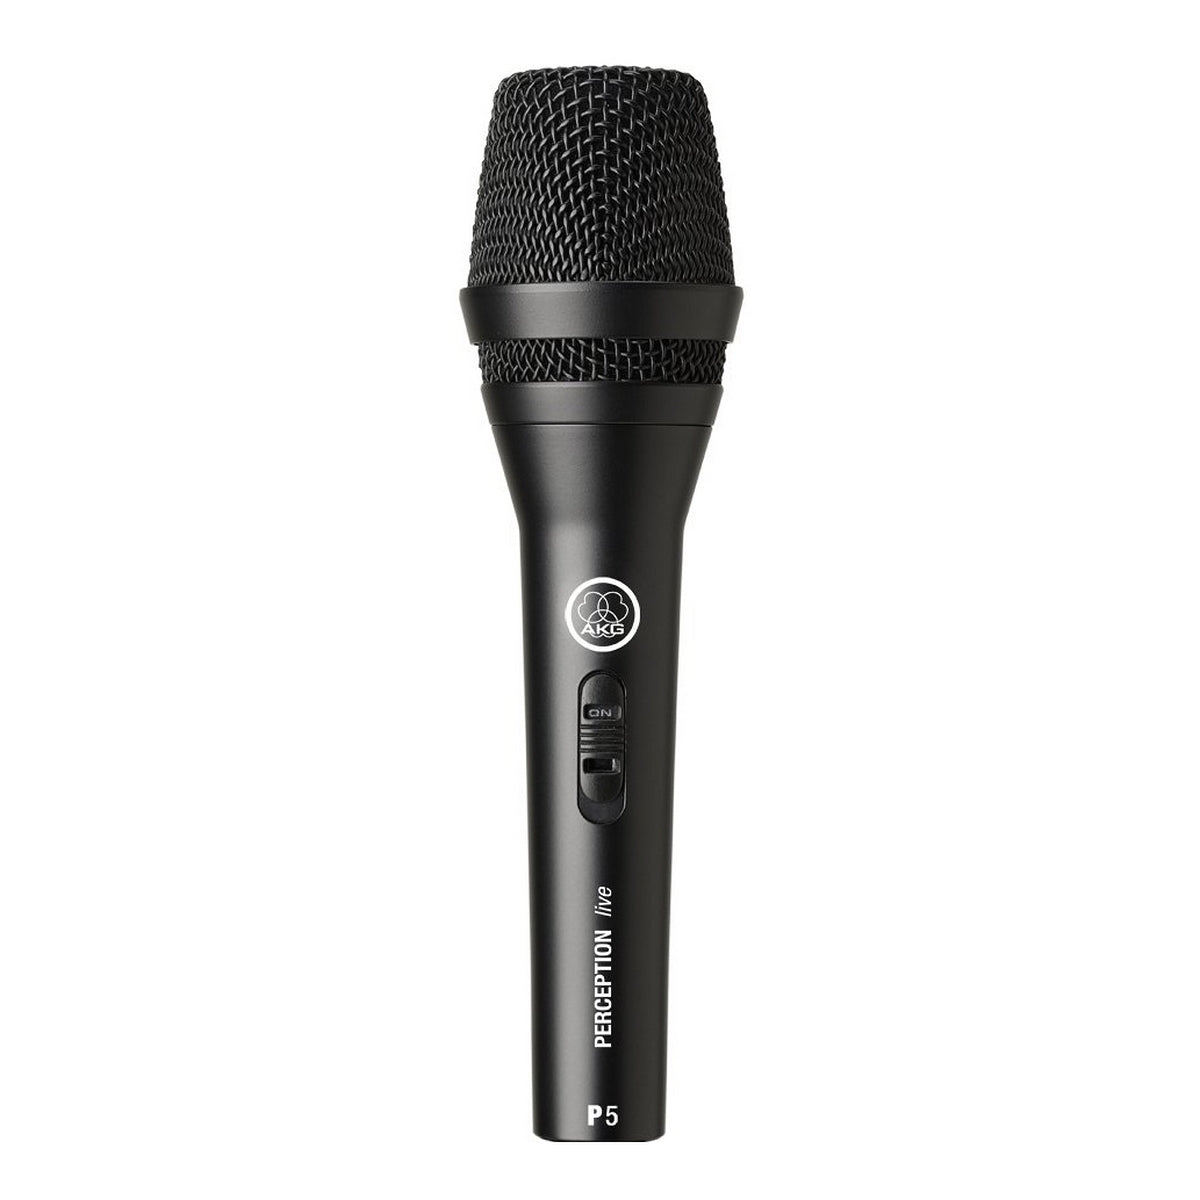 AKG P5 S | Rugged Performance Microphone Designed for Lead Vocals